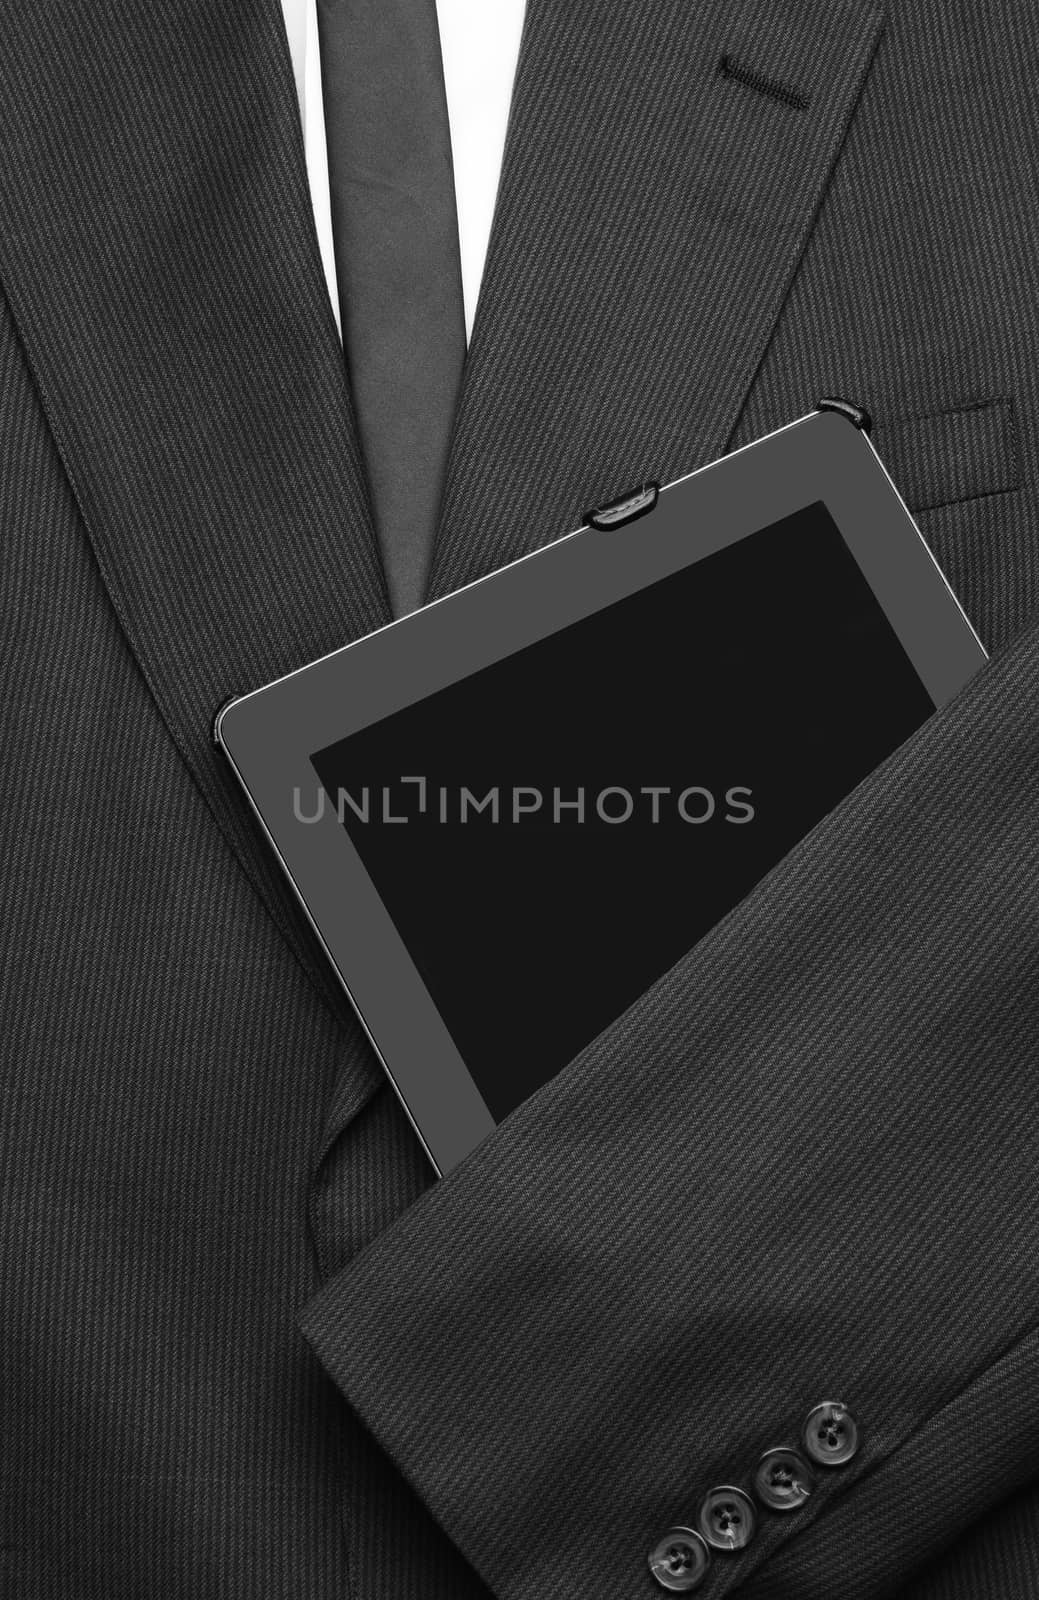 Closeup of a business jacket with white shirt and tie with one arm over a tablet computer. the empty suit is laid out and ready for the day. The screen is blank.